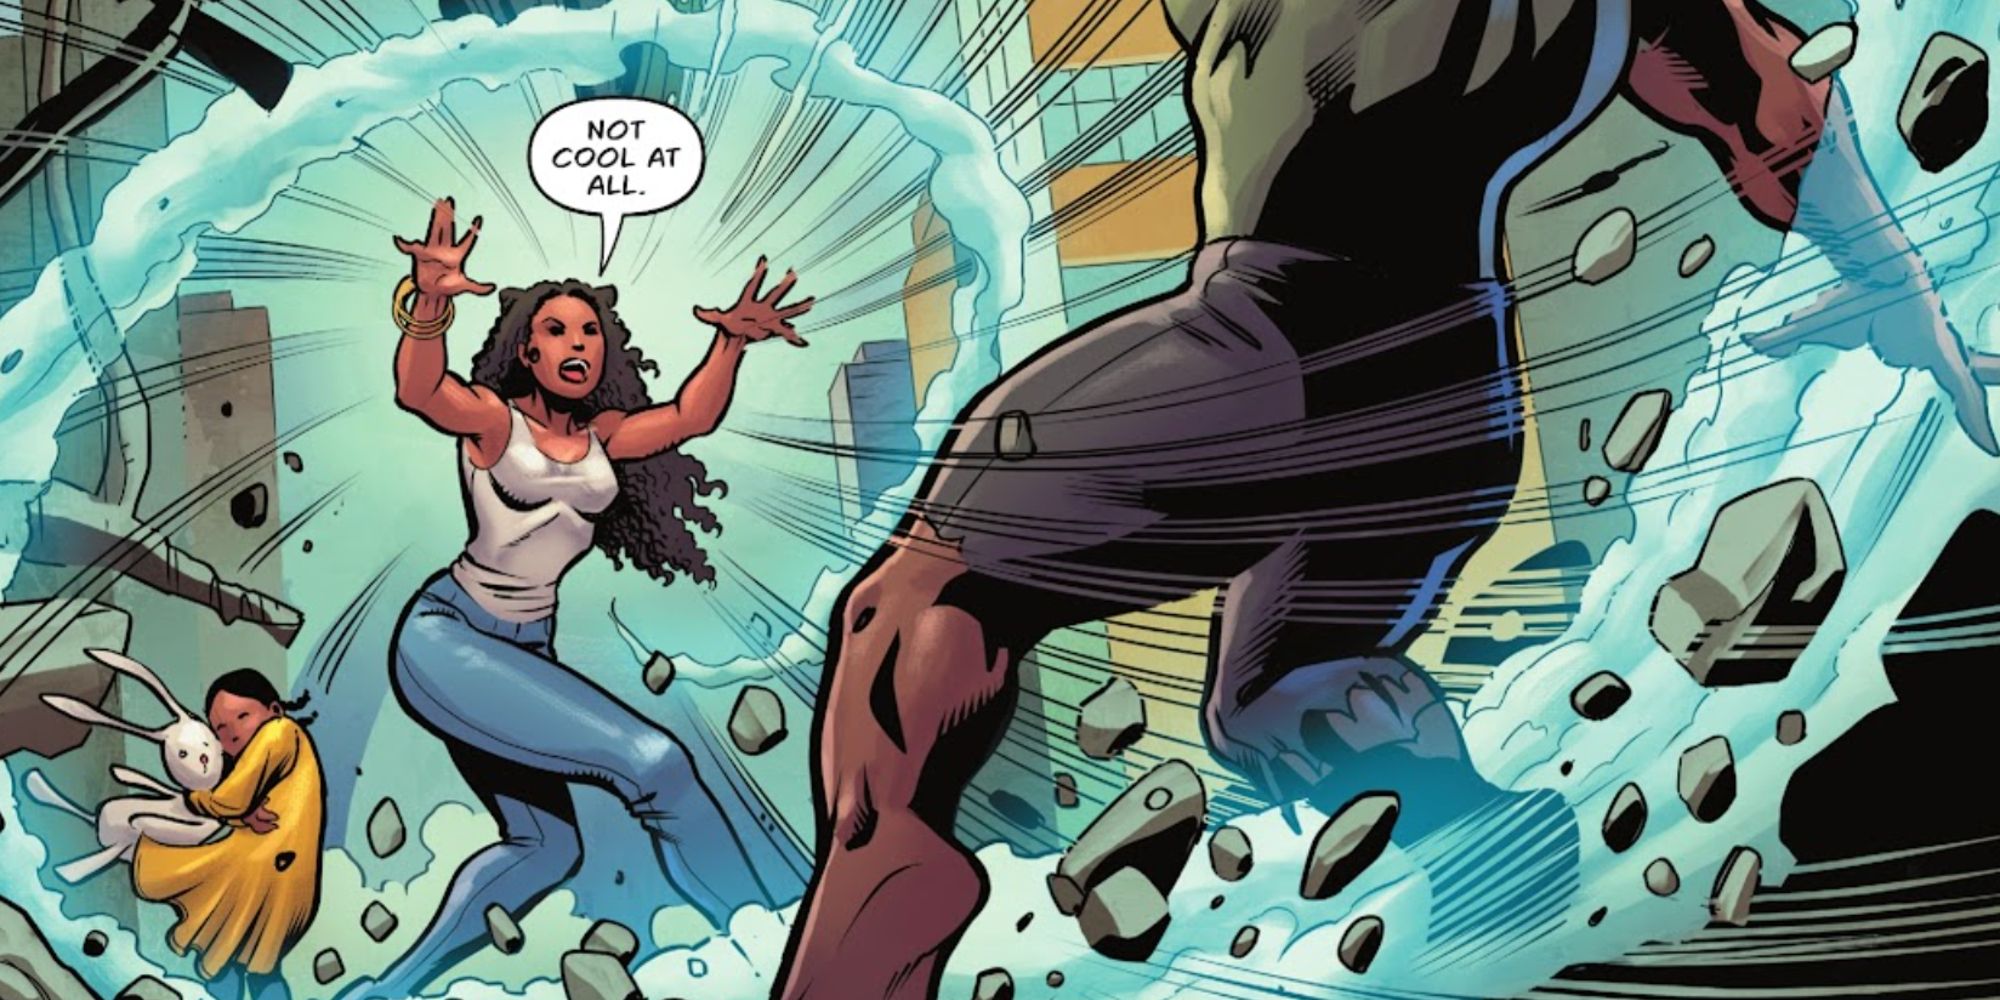 Maxine Hunkel fights a metahuman in The Justice Society Files Cyclone #1